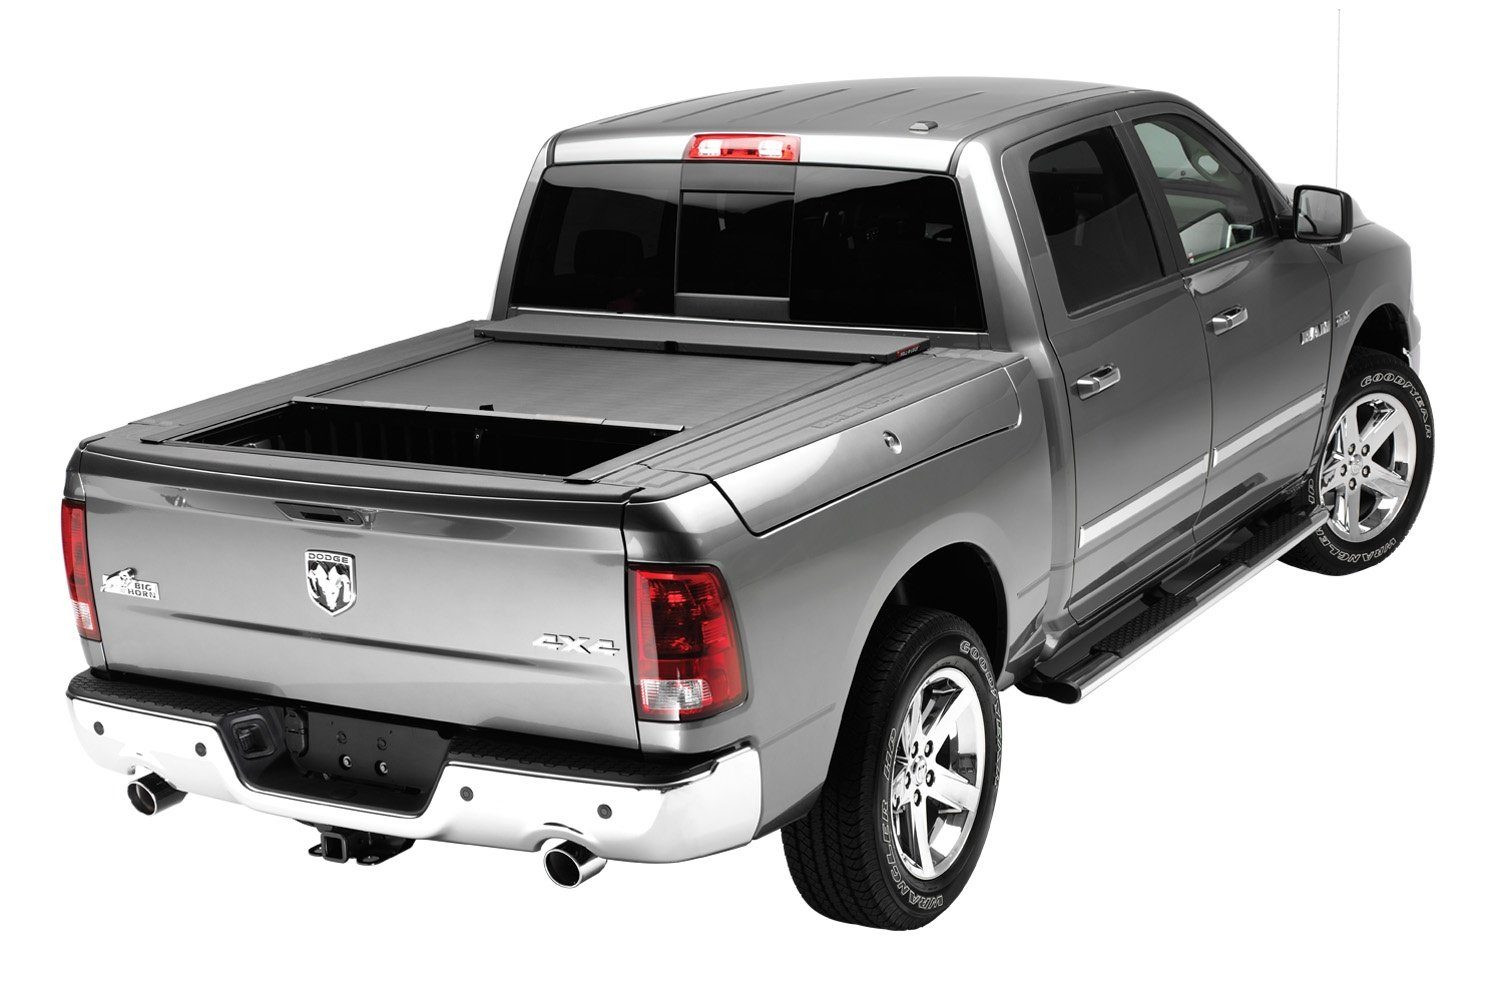 Top Deck Tonneau Cover Locks Gaylord Replacement Keys Undercover intended for sizing 1500 X 1000